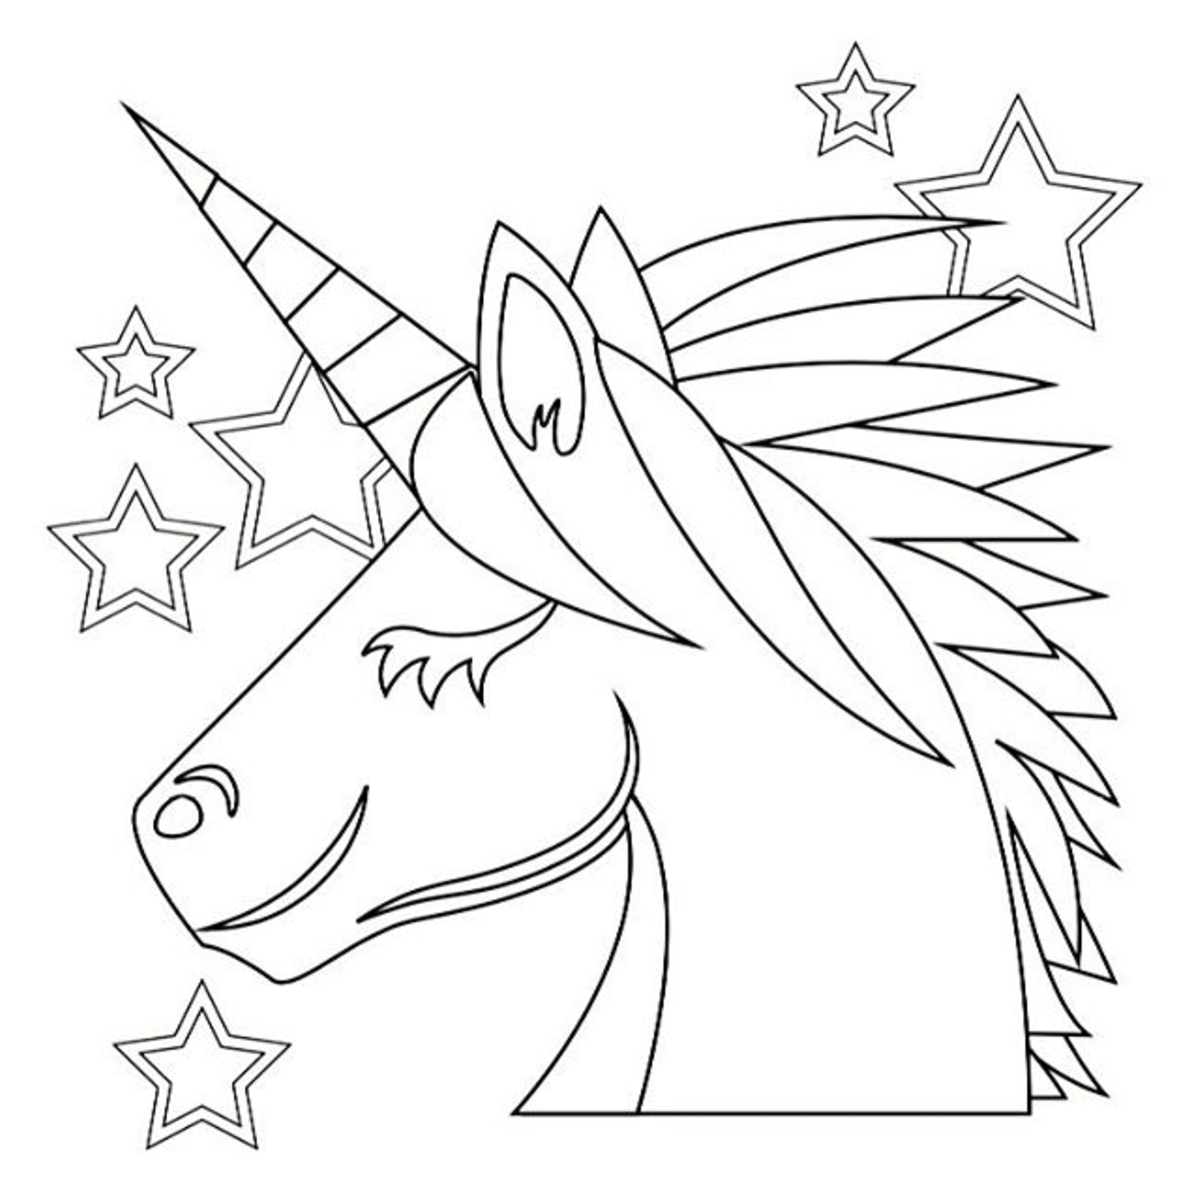 Unicorn Emoji Coloring Pages at GetColorings.com | Free ...